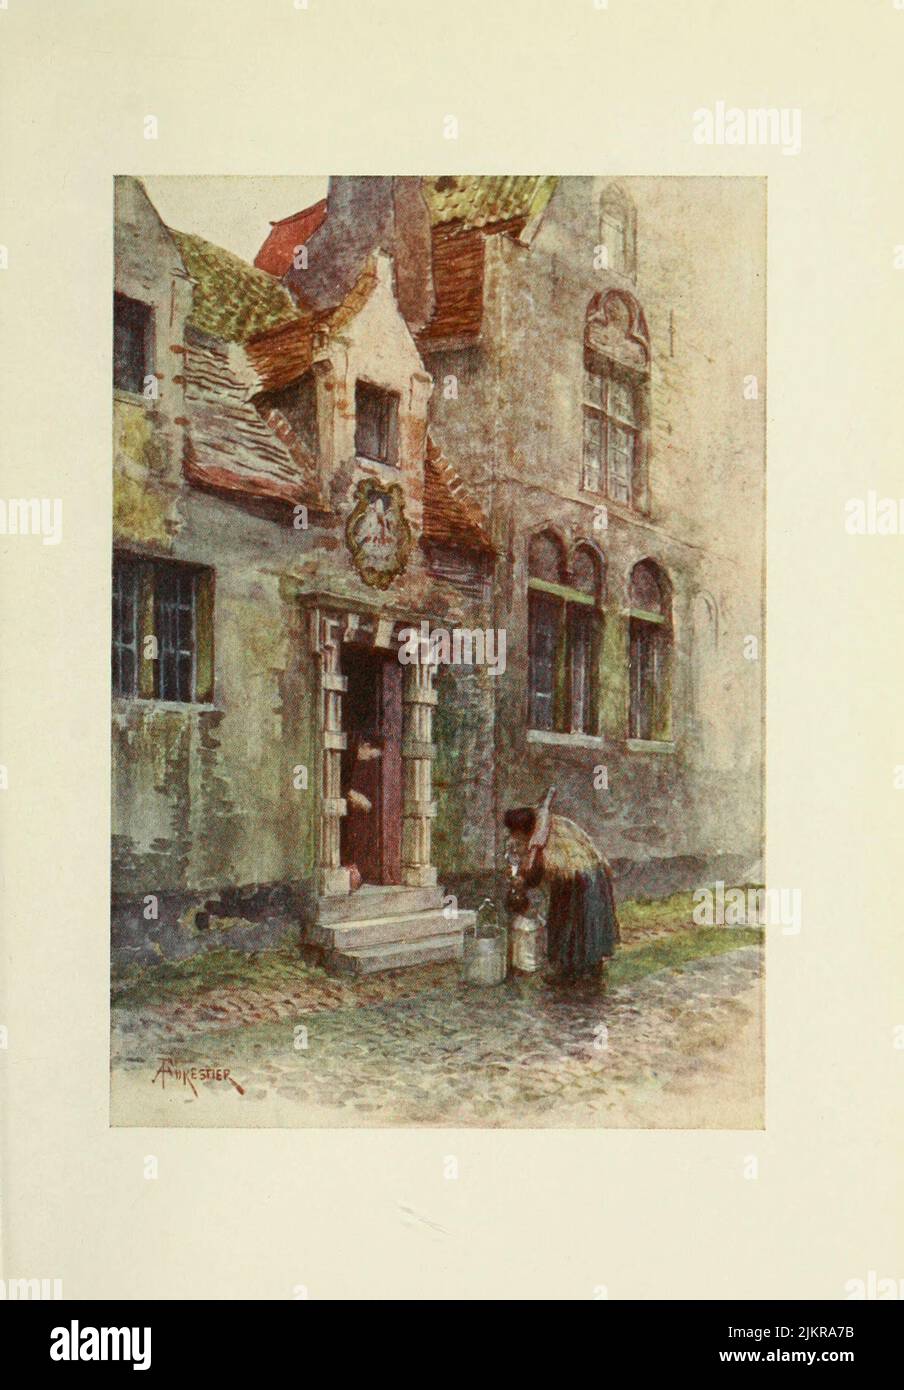 Bruges: Maison du Pélican (Almshouse) Painted by Amedee Forestier, from the book '  Bruges and West Flanders ' by George William Thomson Omond, Publication date 1906 Publisher London : A. & C. Black Sir Amédée Forestier (Paris 1854 – 18 November 1930 London) was an Anglo-French artist and illustrator who specialised in historical and prehistoric scenes, and landscapes. Stock Photo